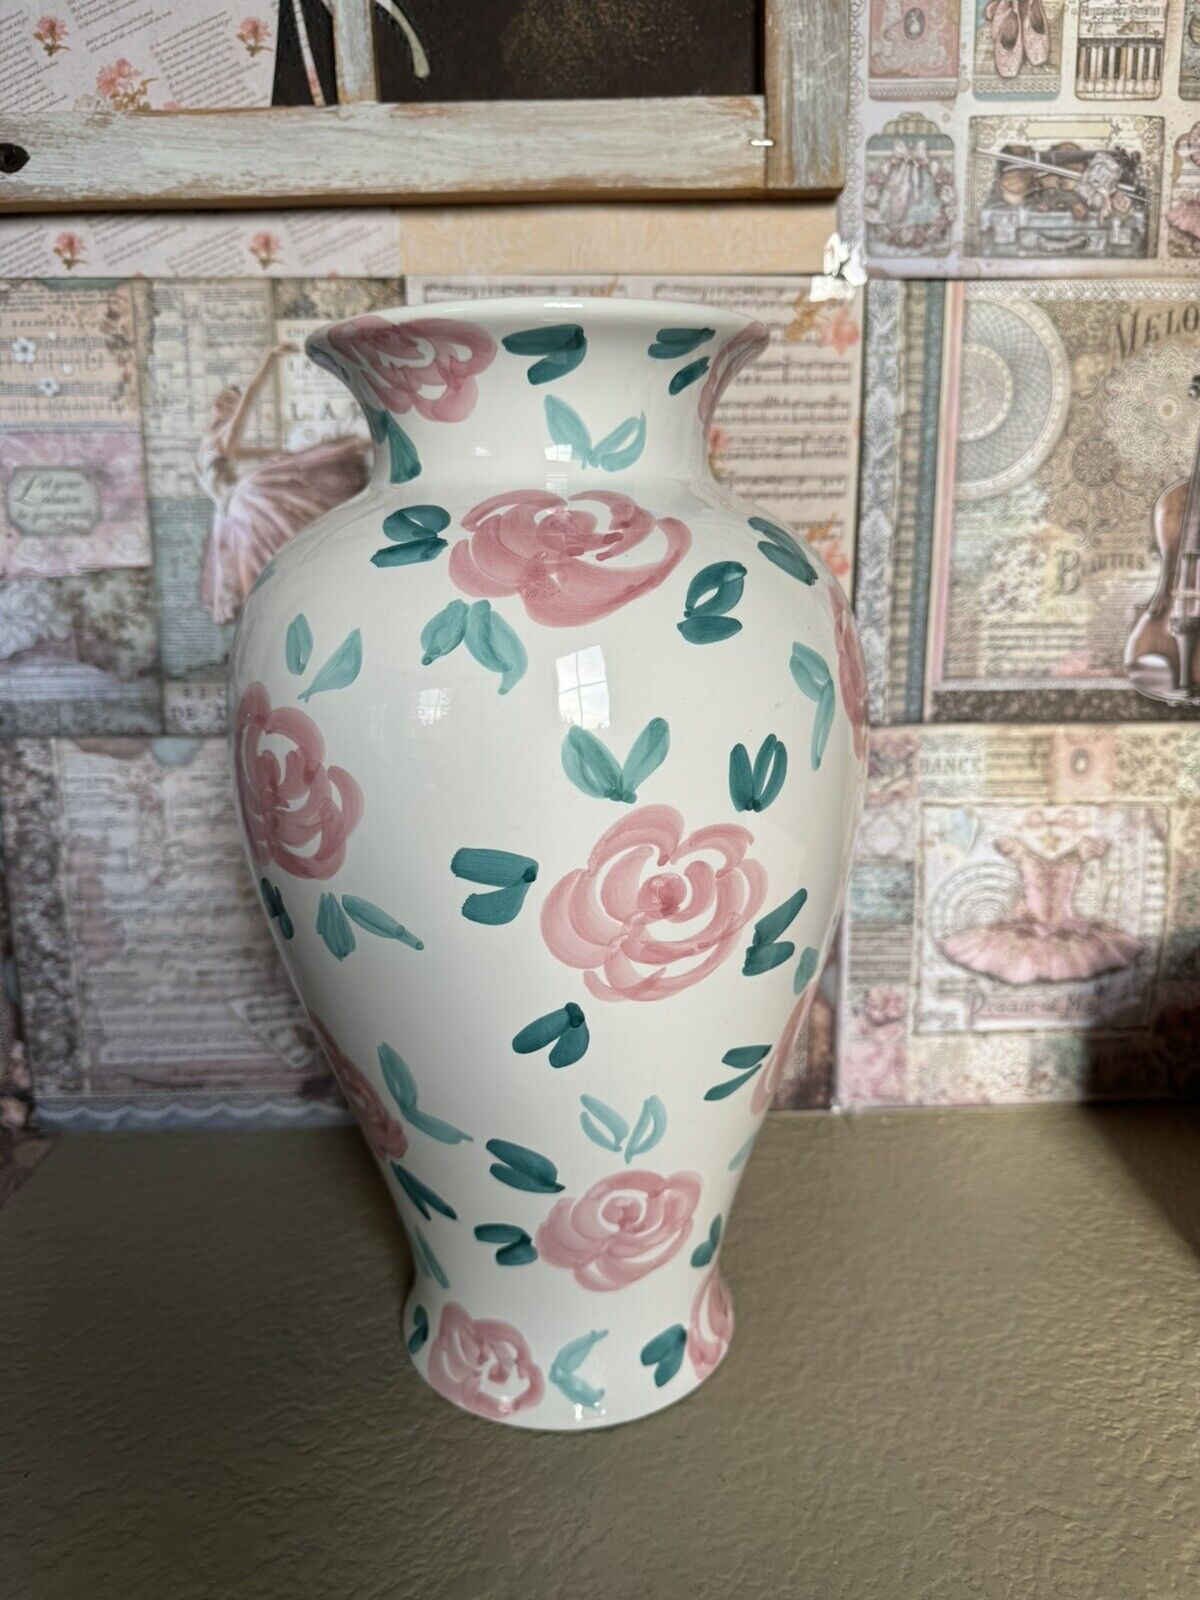 Pier 1 Imports Vase Big Made In Italy